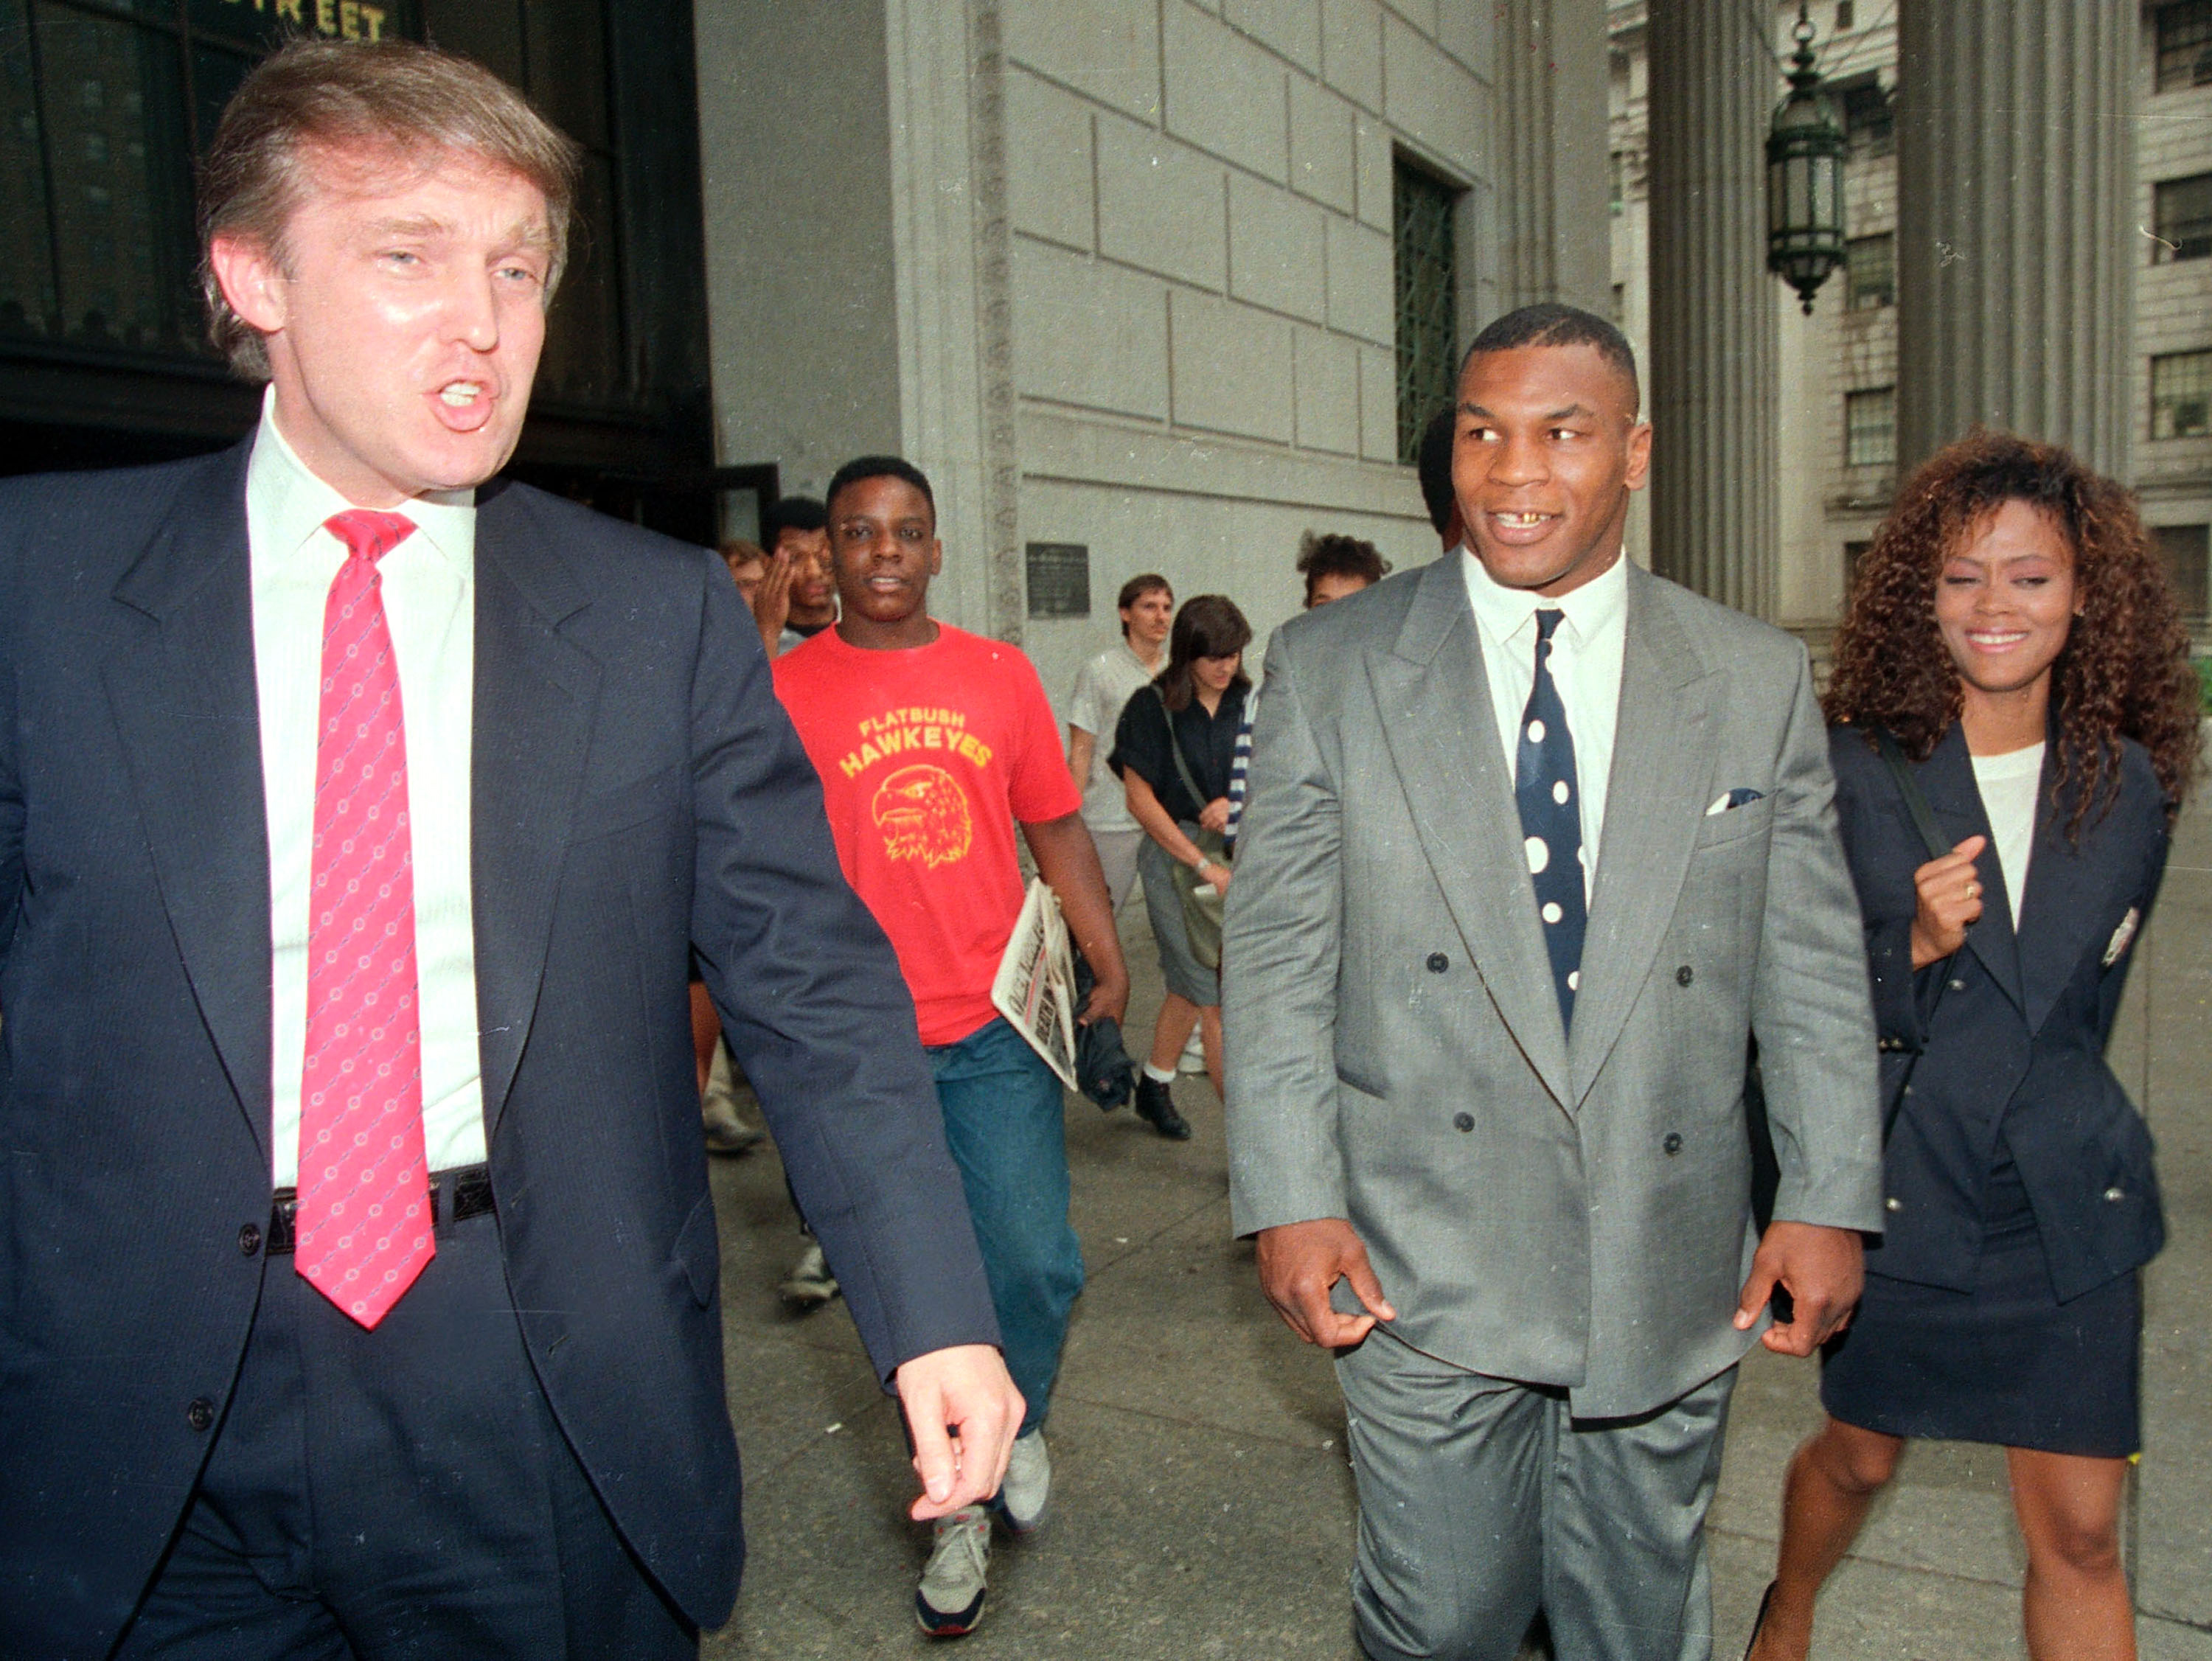 Heavyweight champion Mike Tyson, his wife, actress Robin Givens and Donald Trump, leave the New York State Supreme Court building on July 22, 1988.